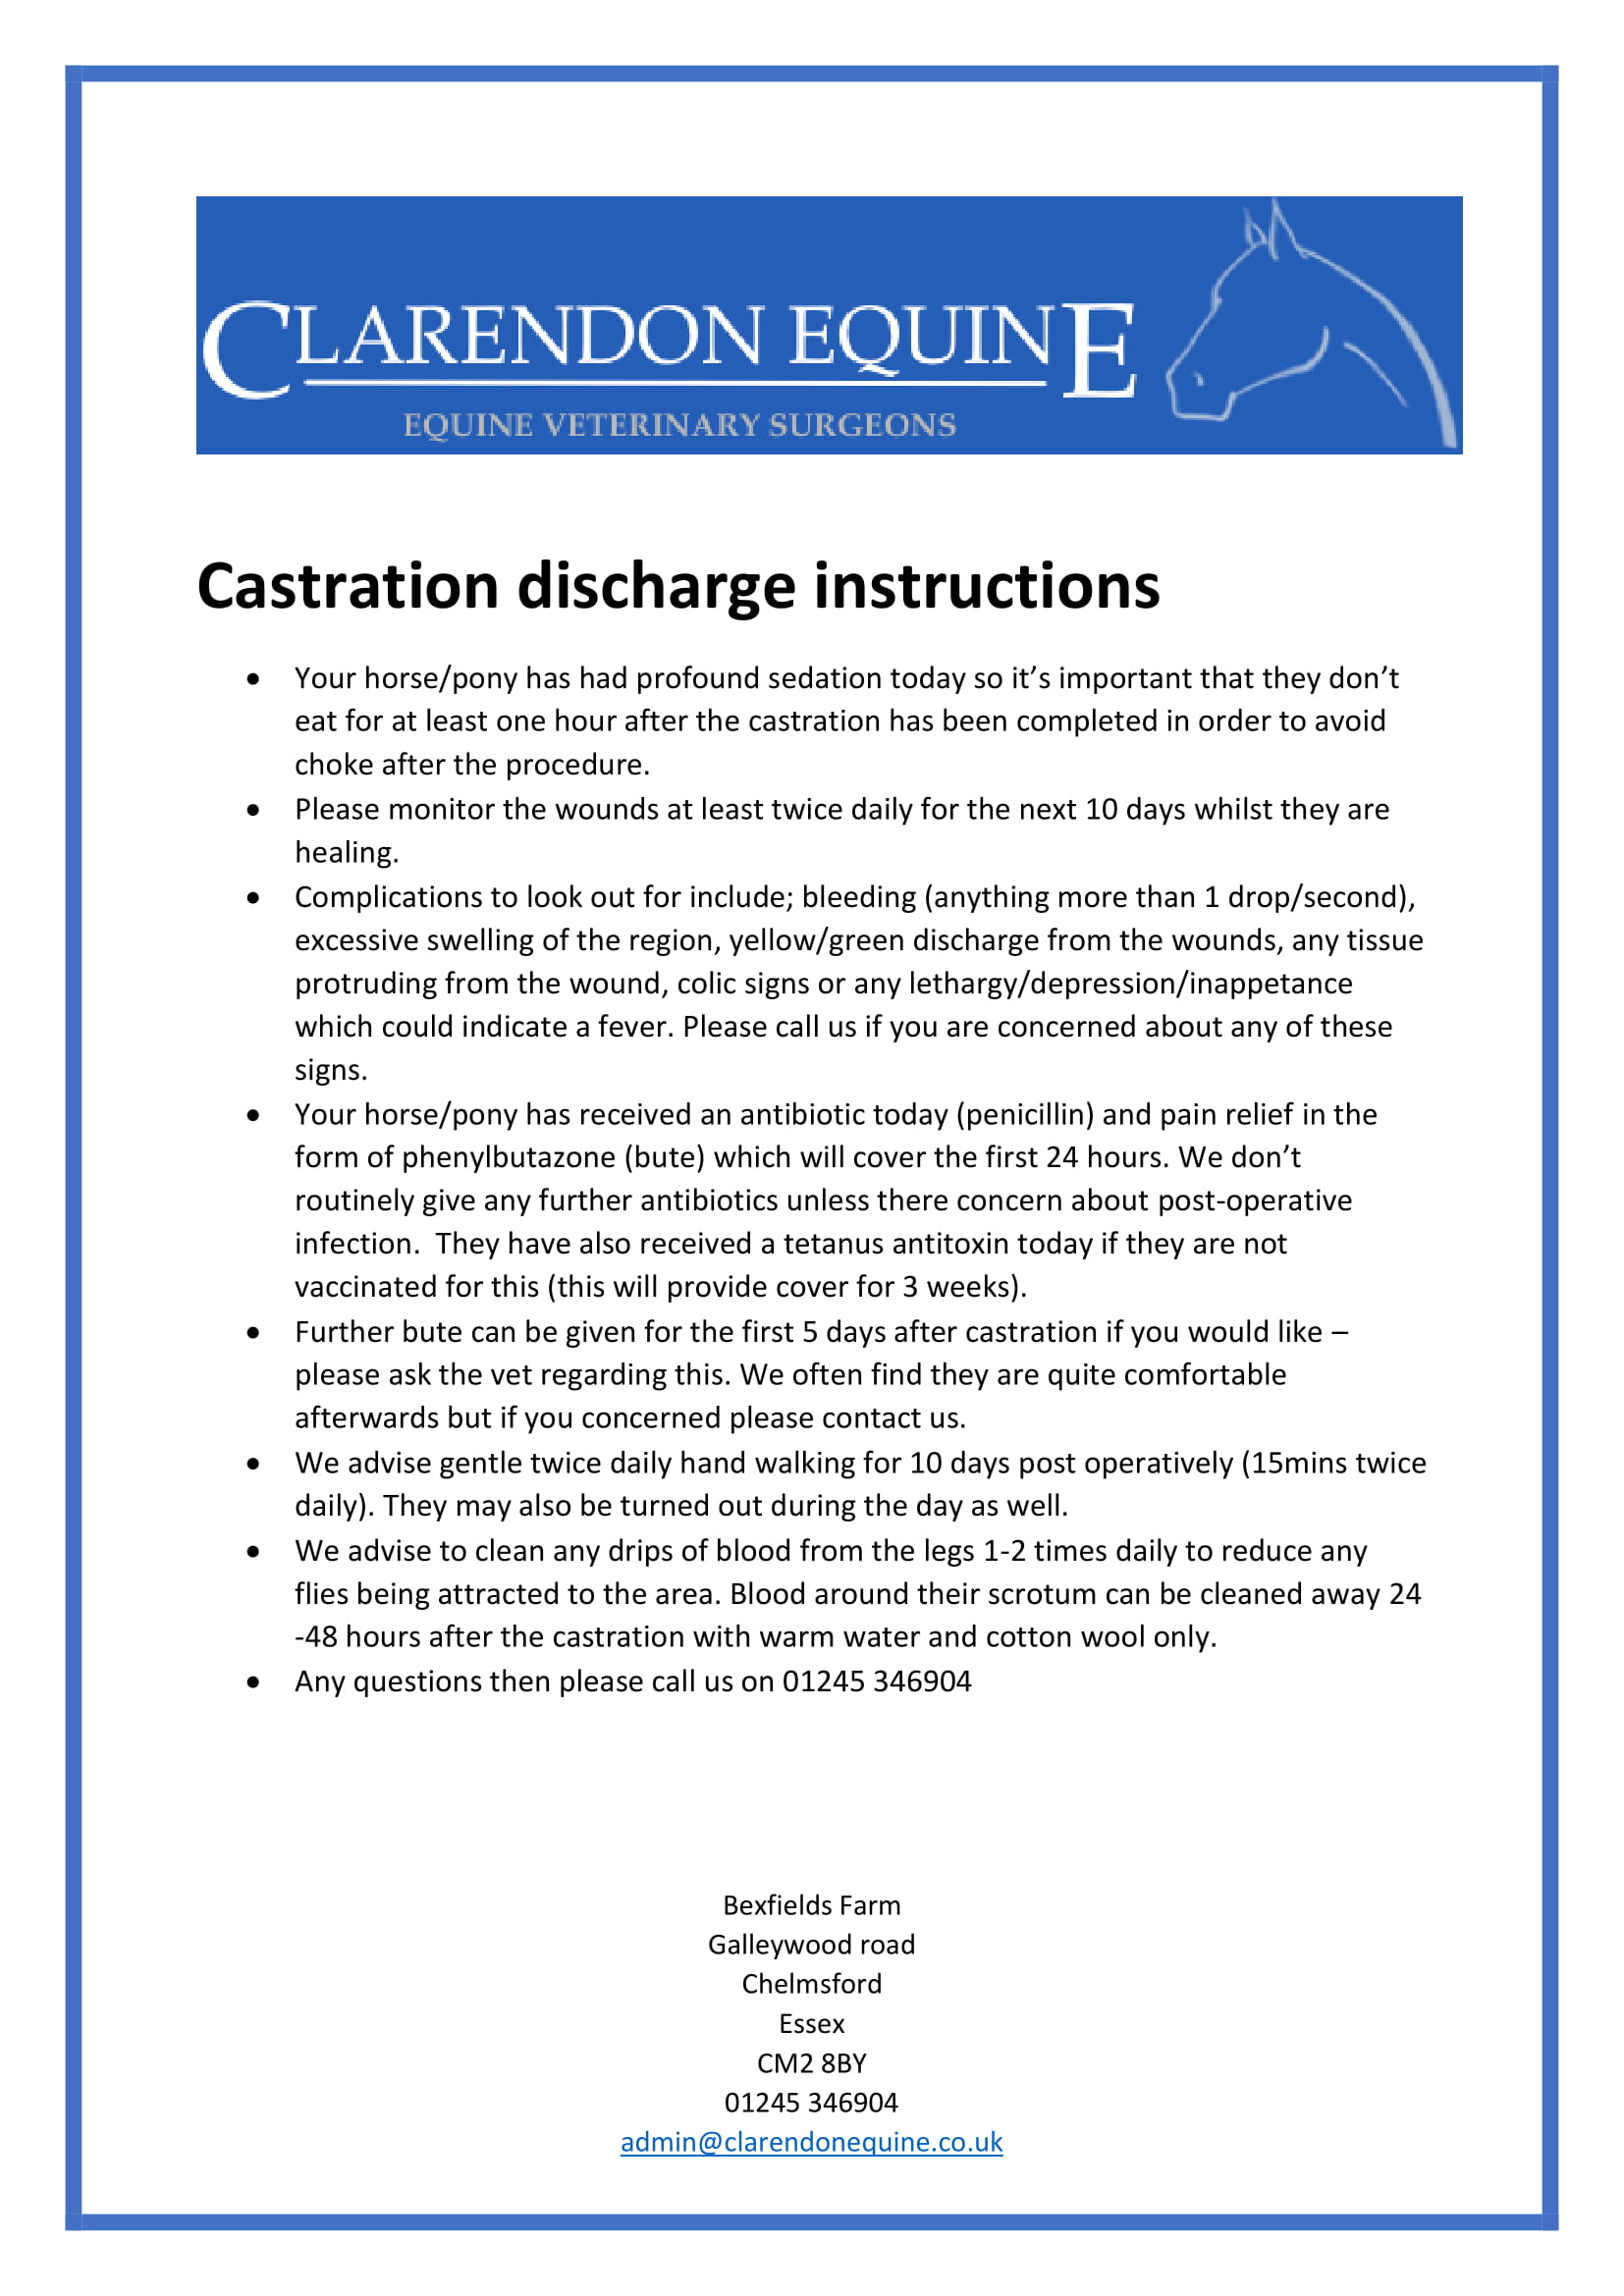 Castration discharge instructions